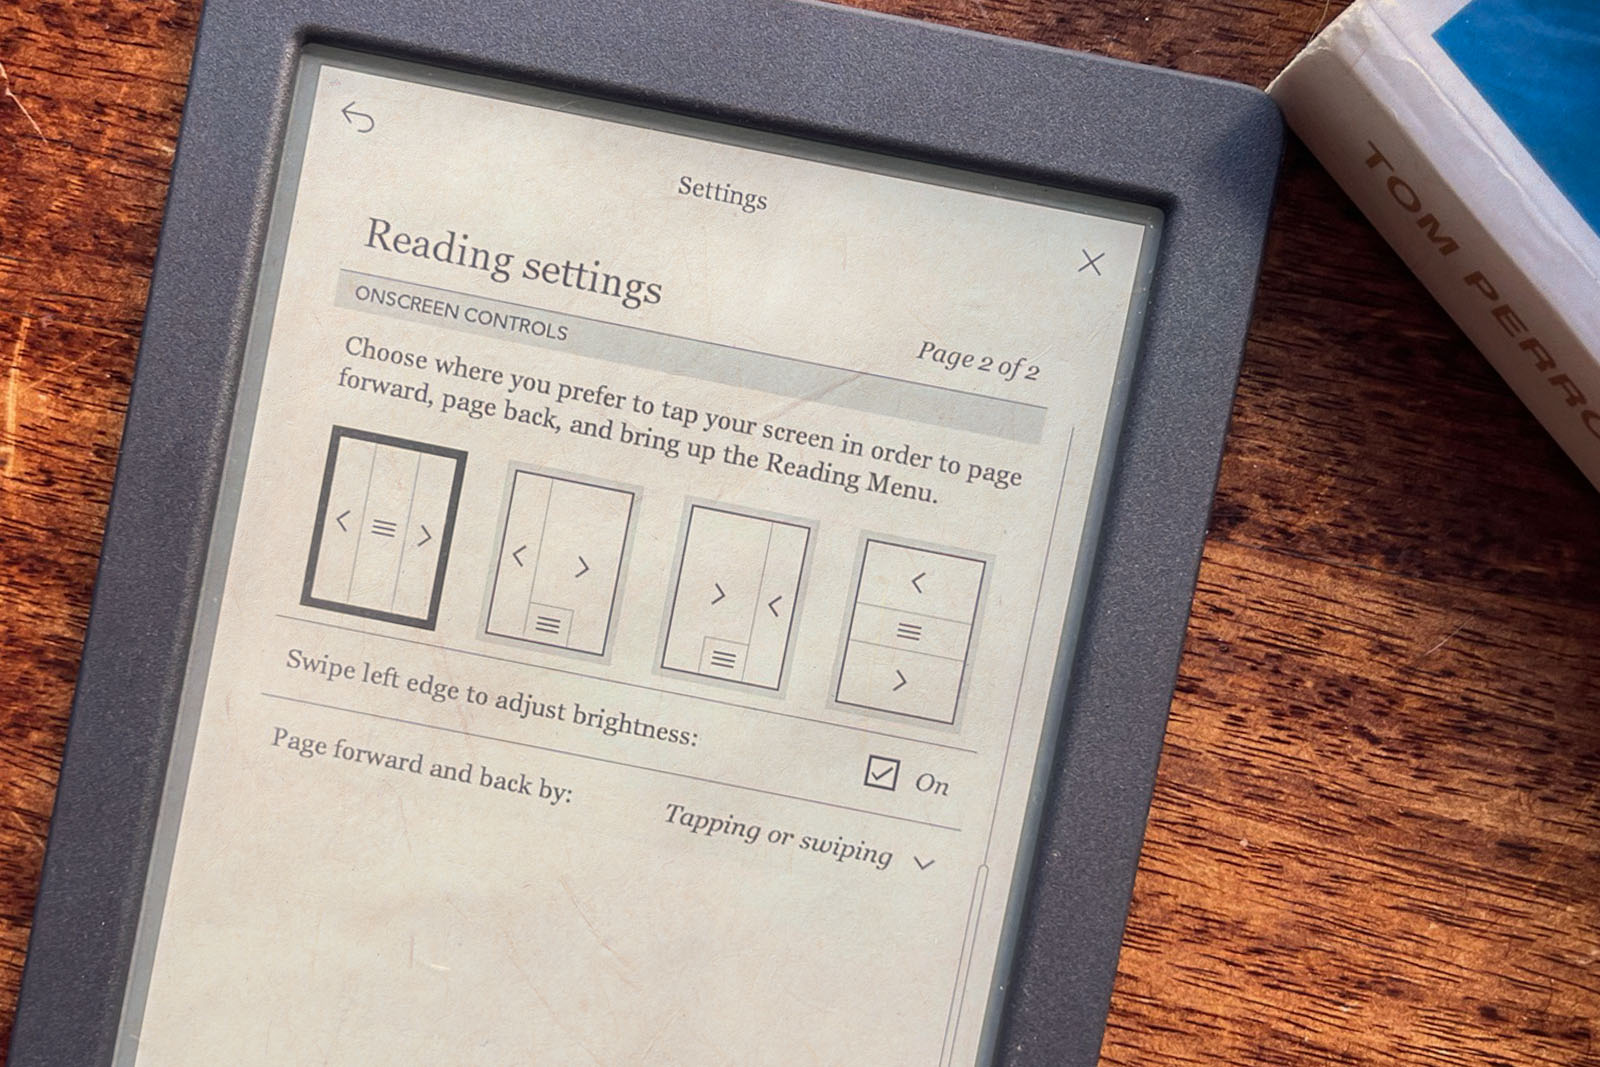 Kobo Nia Review: Upping The Ante For Entry-Level eReaders